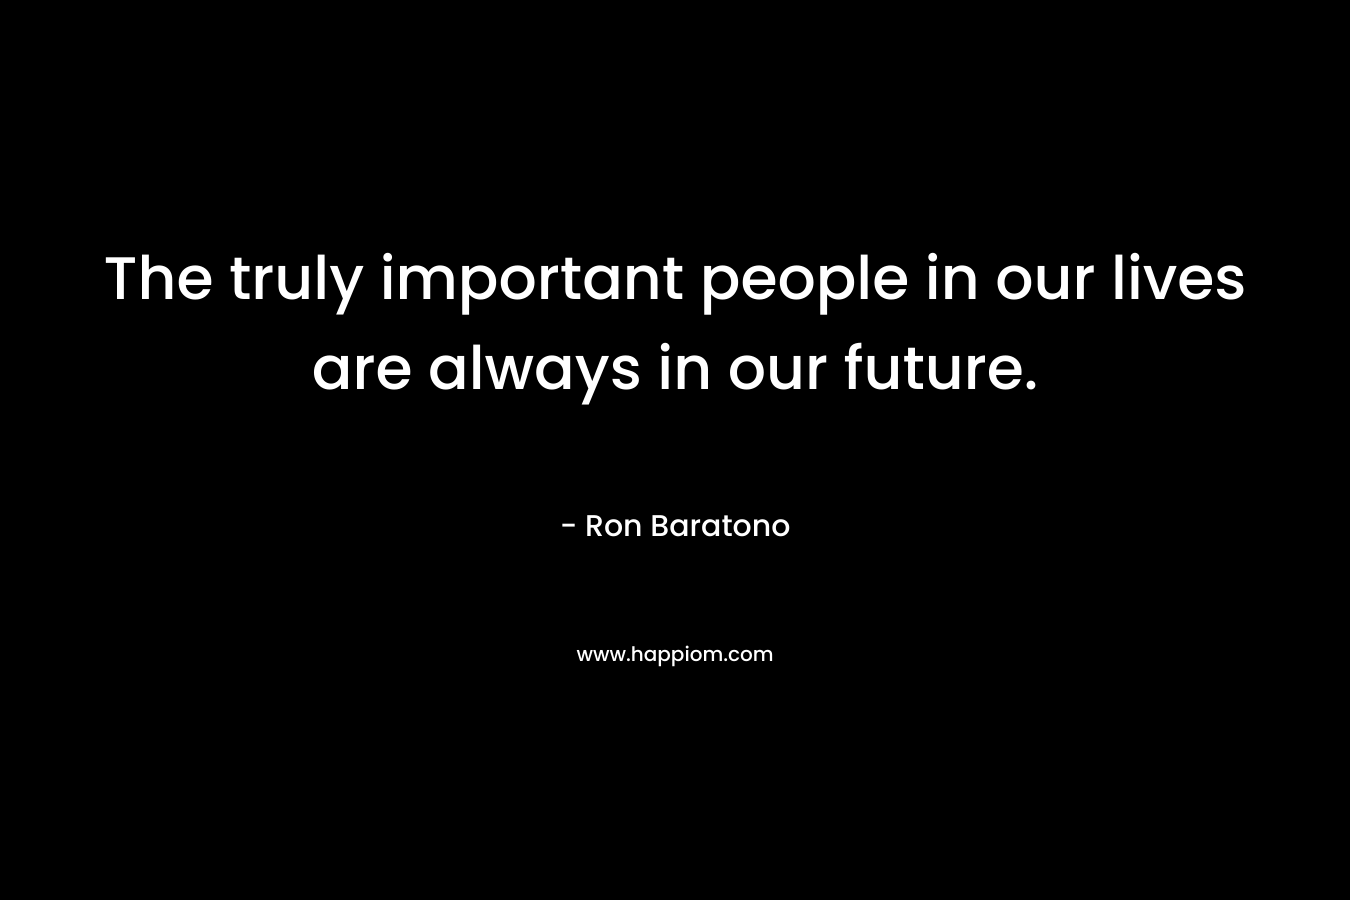 The truly important people in our lives are always in our future. – Ron Baratono